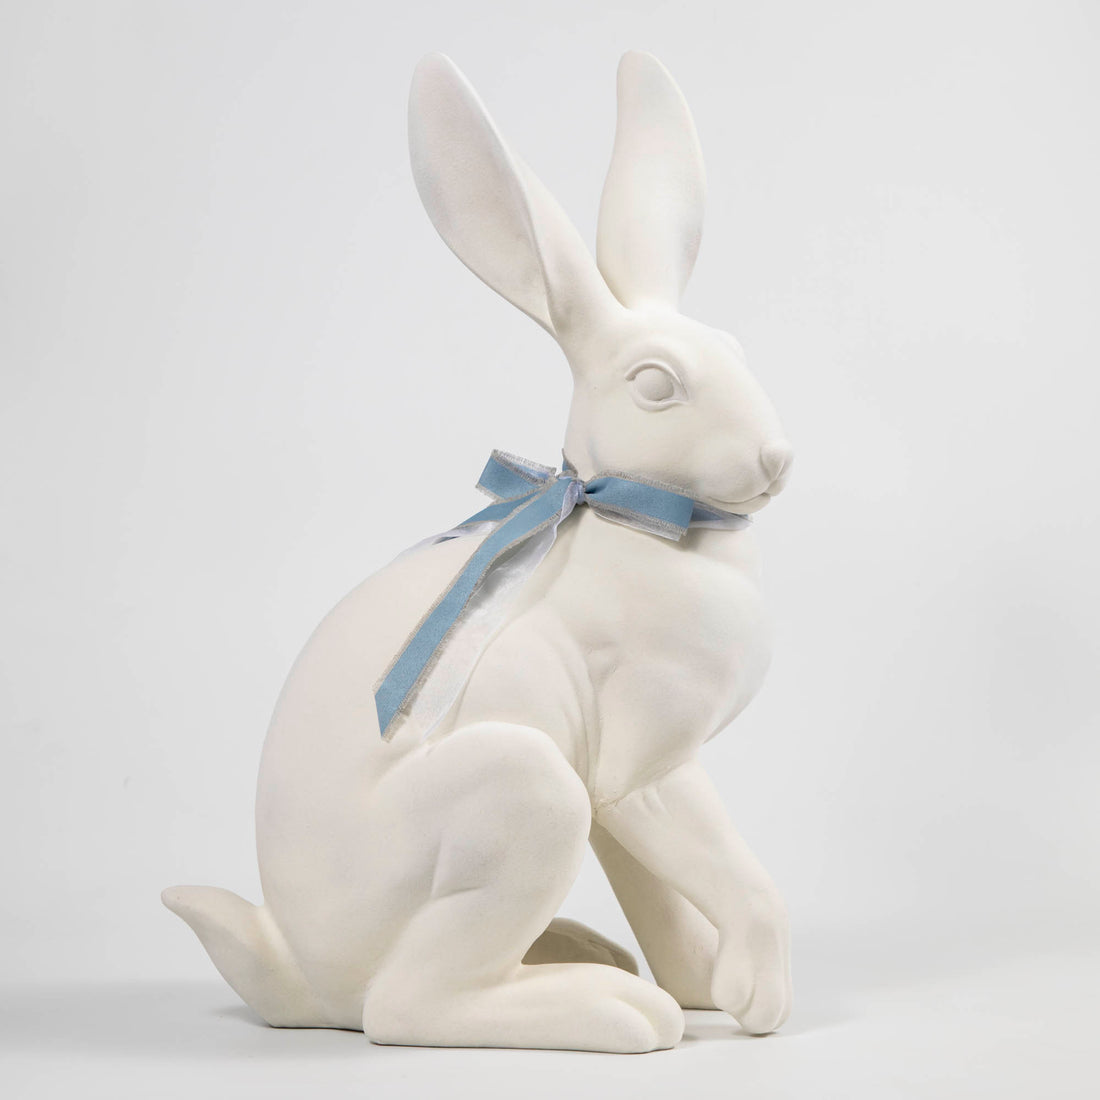 A Flocked Bunny, White &amp; Pink from Glitterville, with a blue ribbon, perfect for Easter decorations.